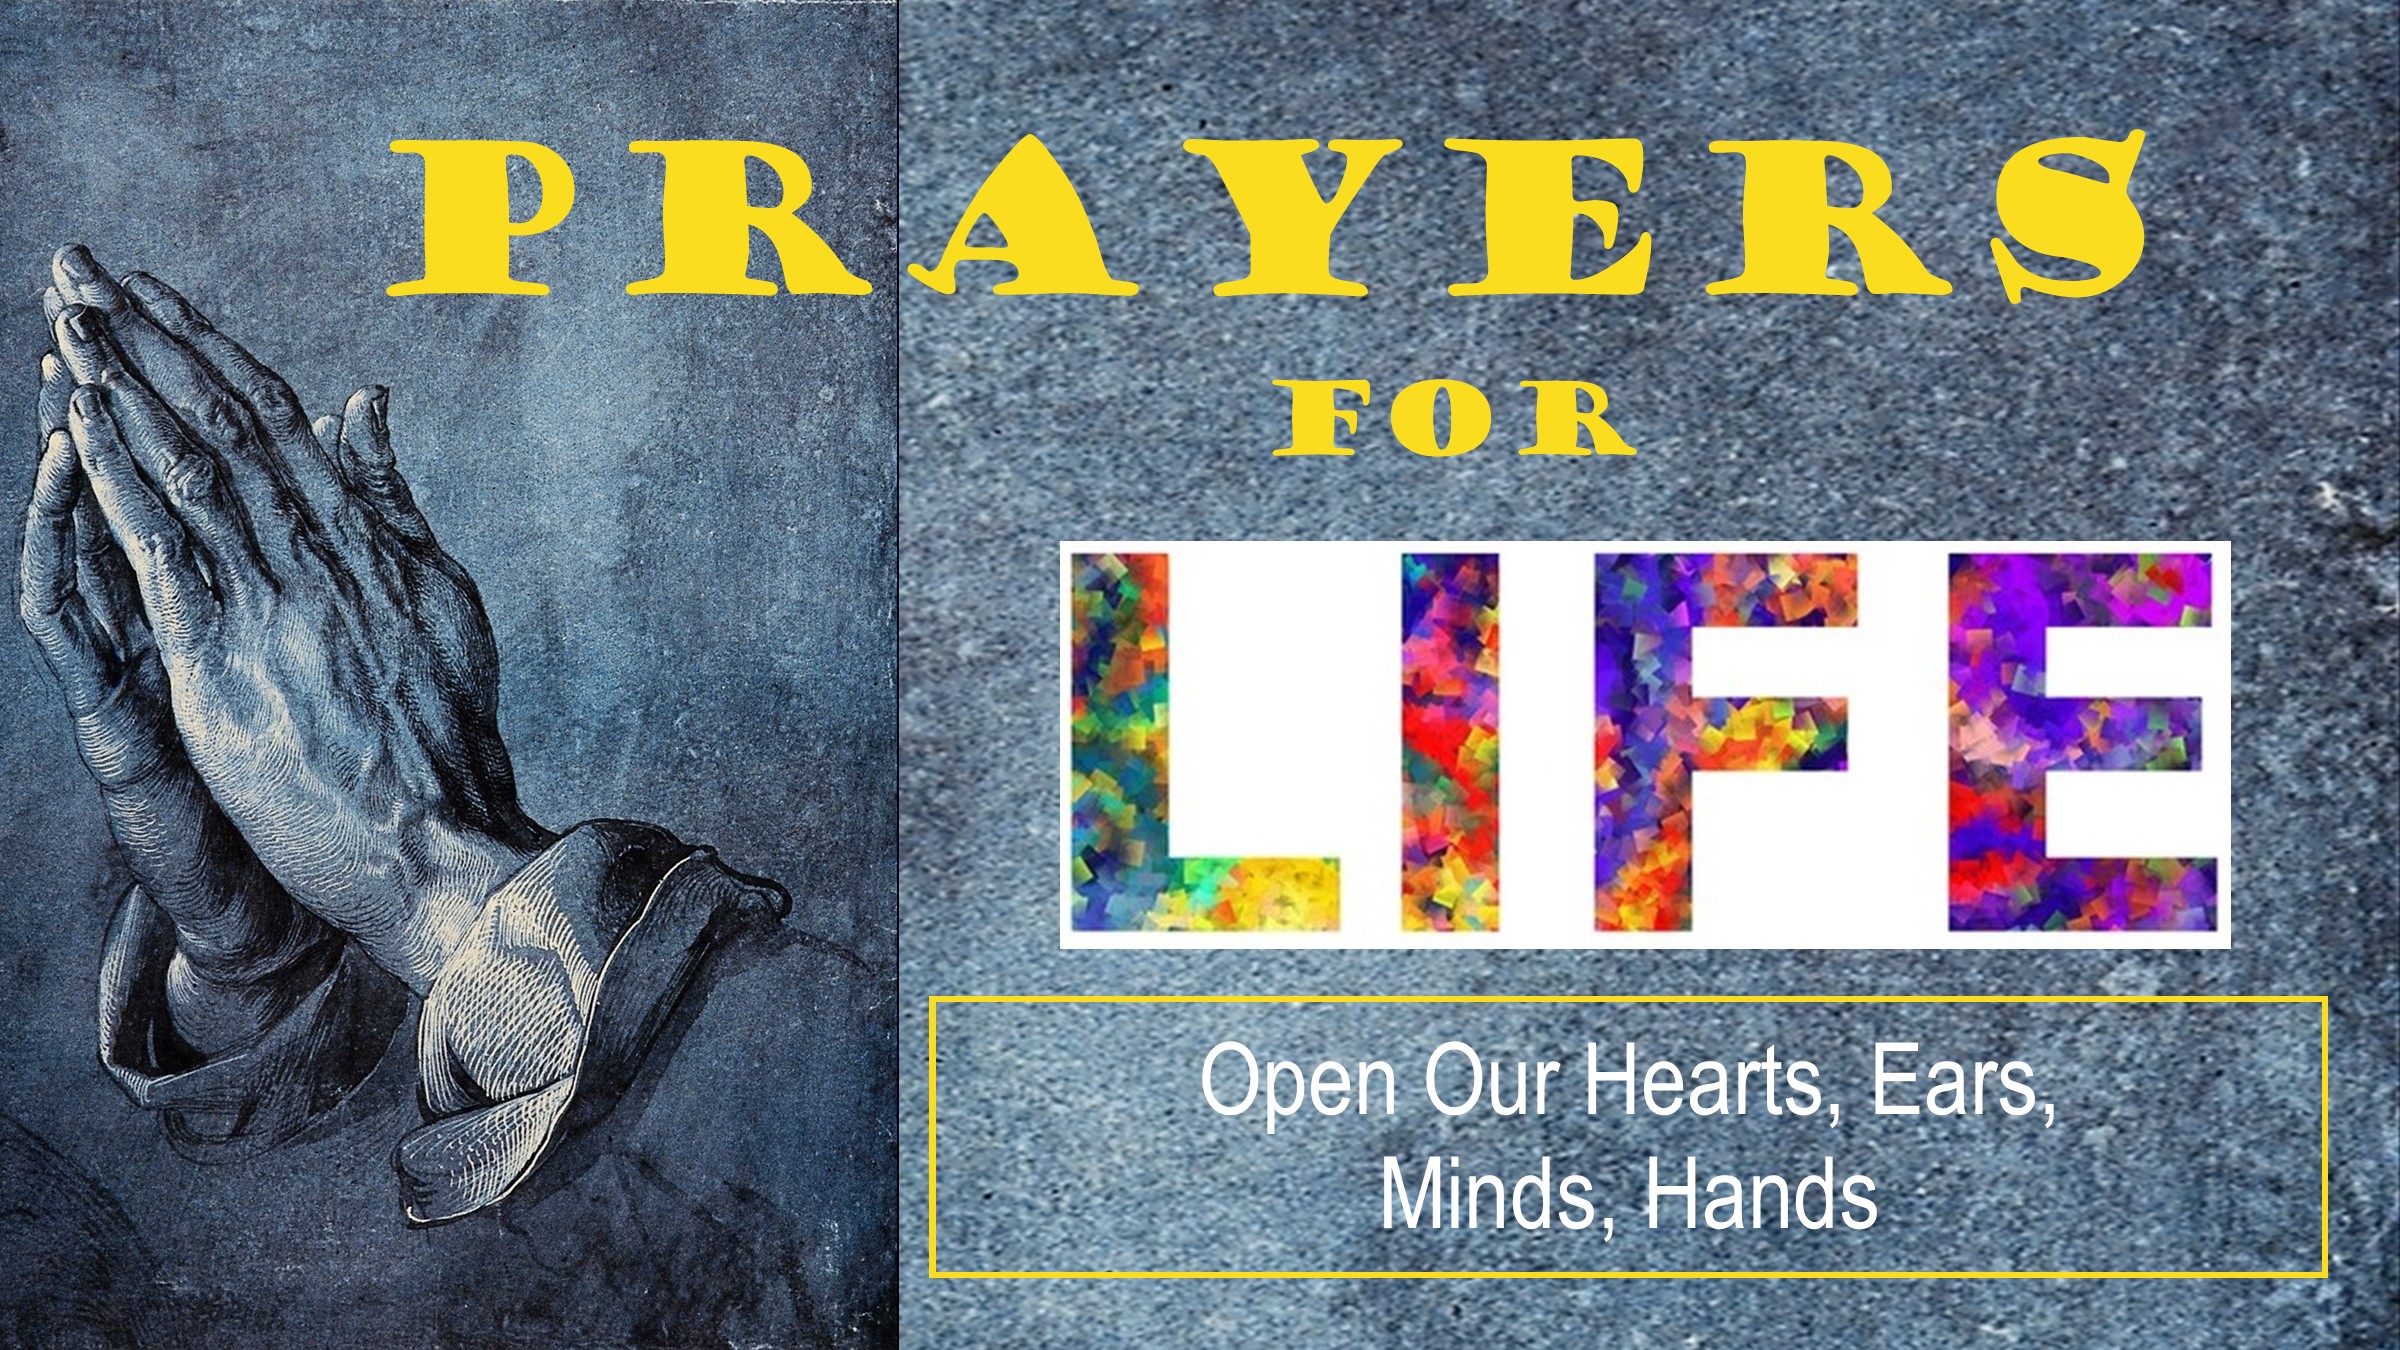 Open Our Hearts, Ears, Minds, Hands